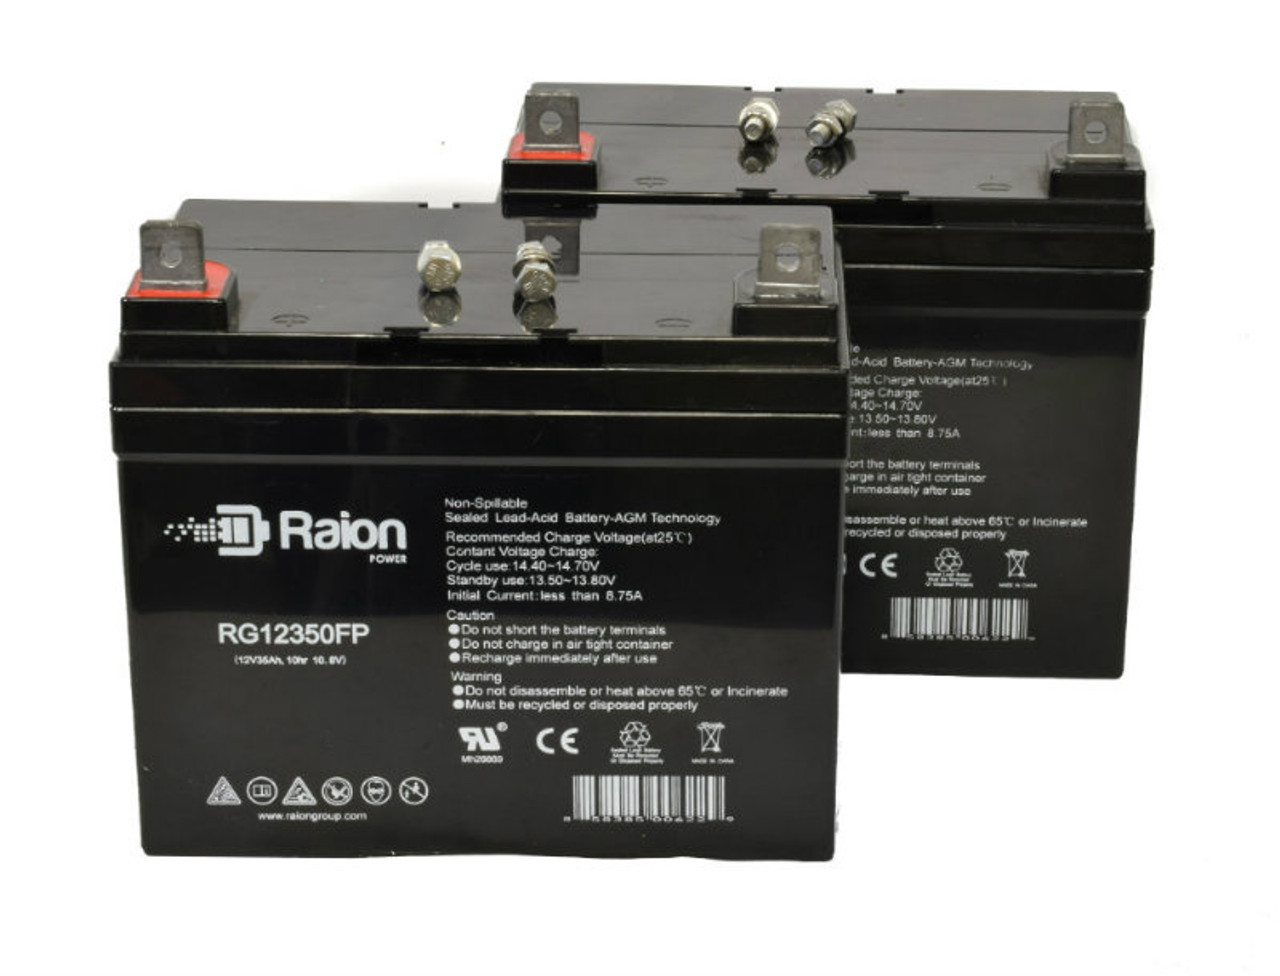 Raion Power Replacement 12V 35Ah Lawn Mower Battery for Troy-Bilt 15 Gear & Hydro - 2 Pack